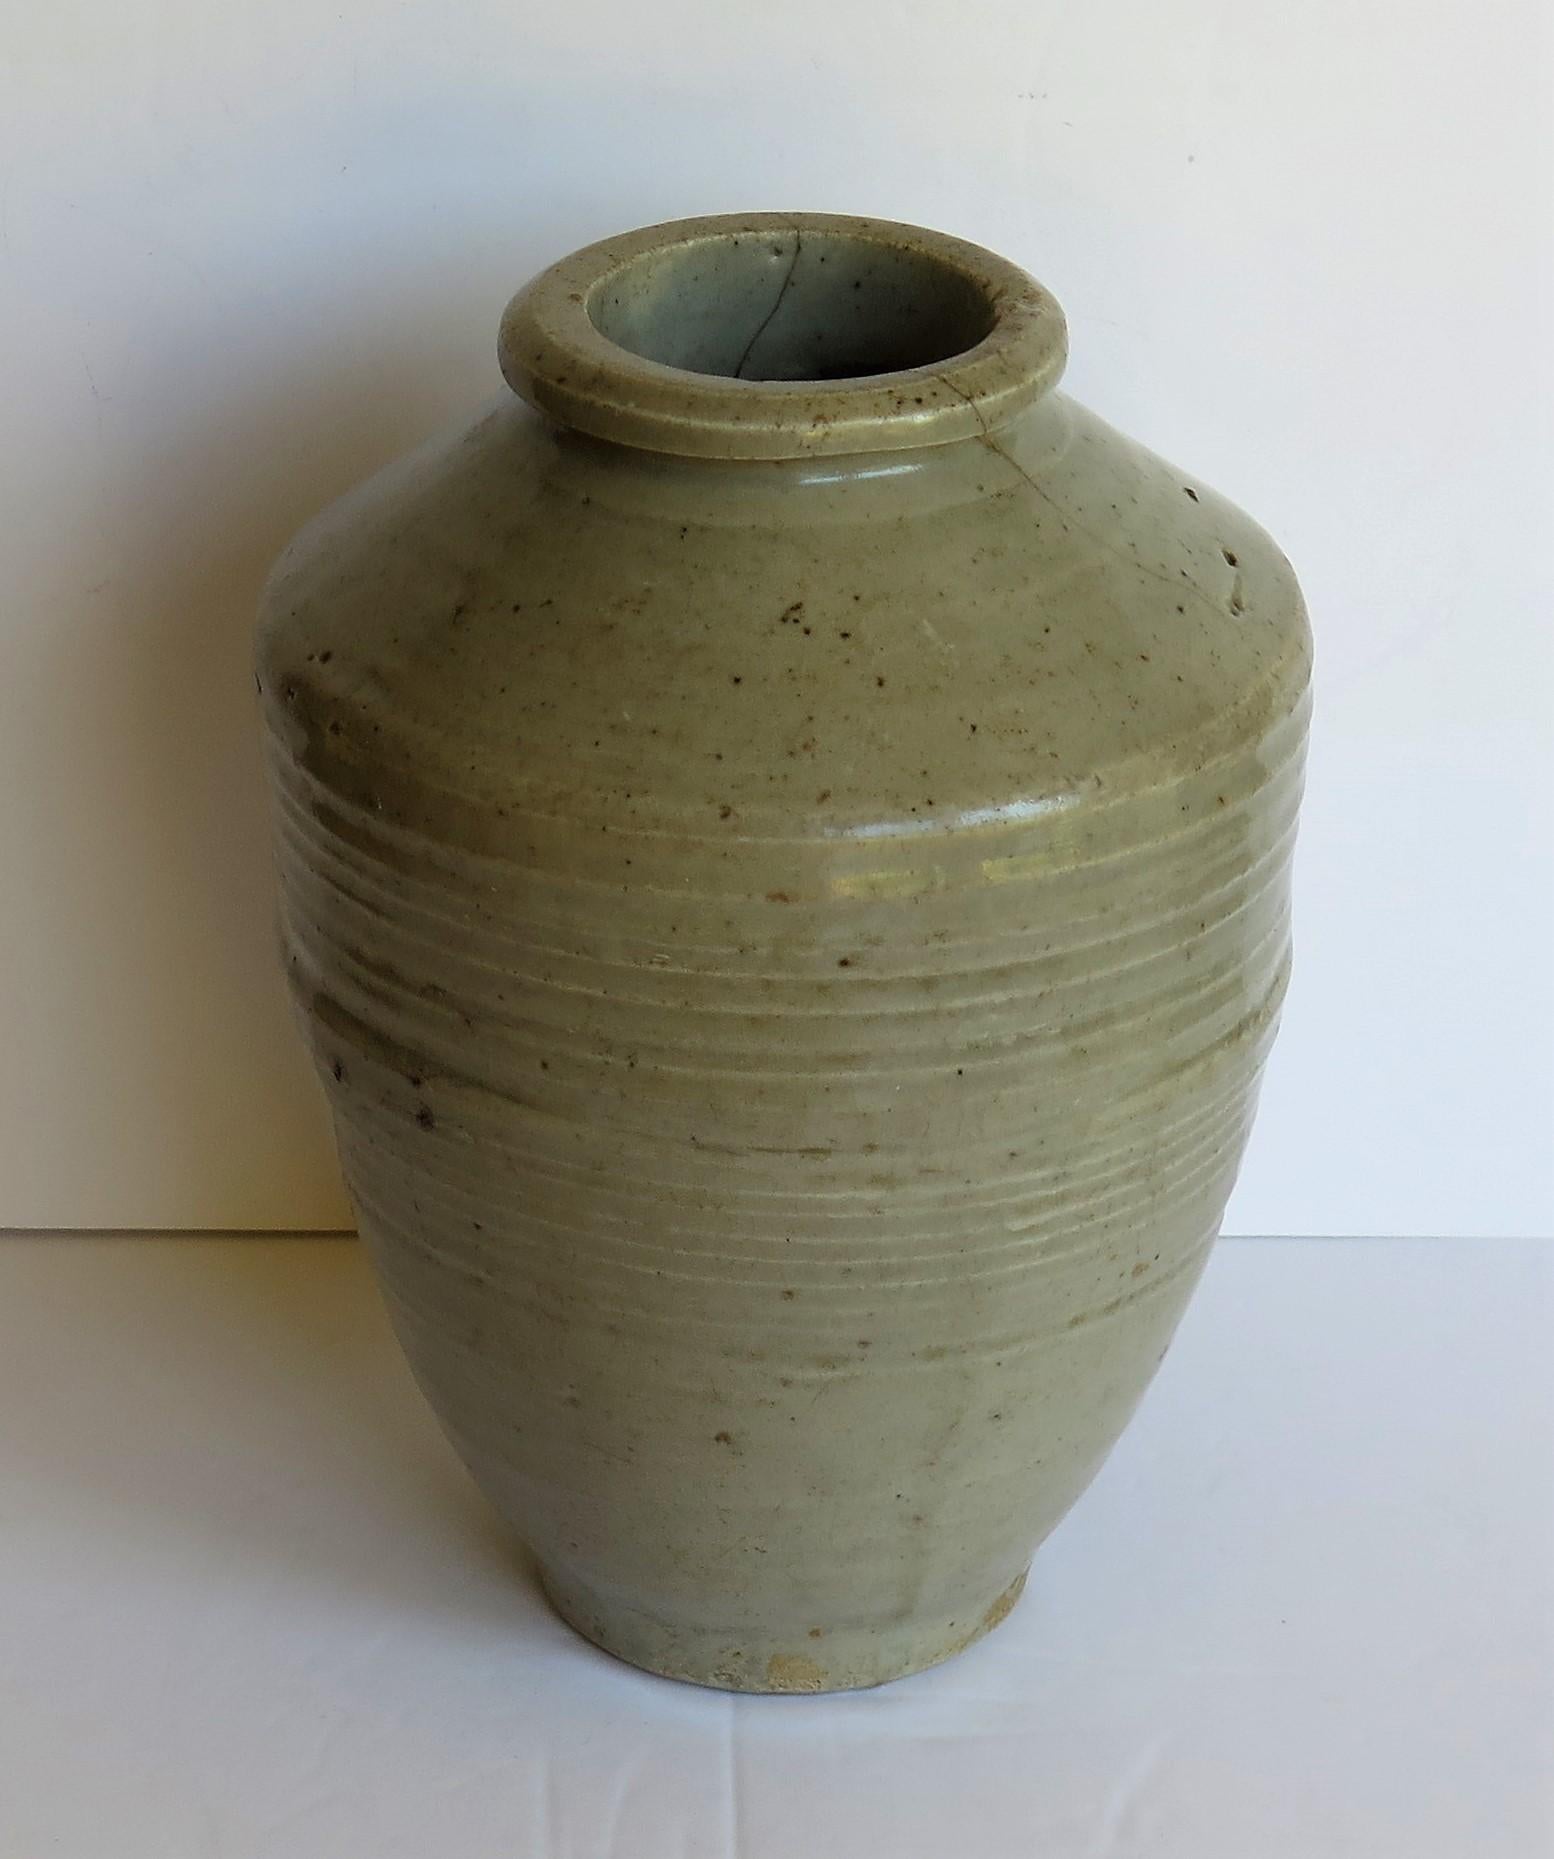 Hand-Crafted Chinese Ceramic Ming Yao Jar or Vase Celadon Glaze, Early 17th Century